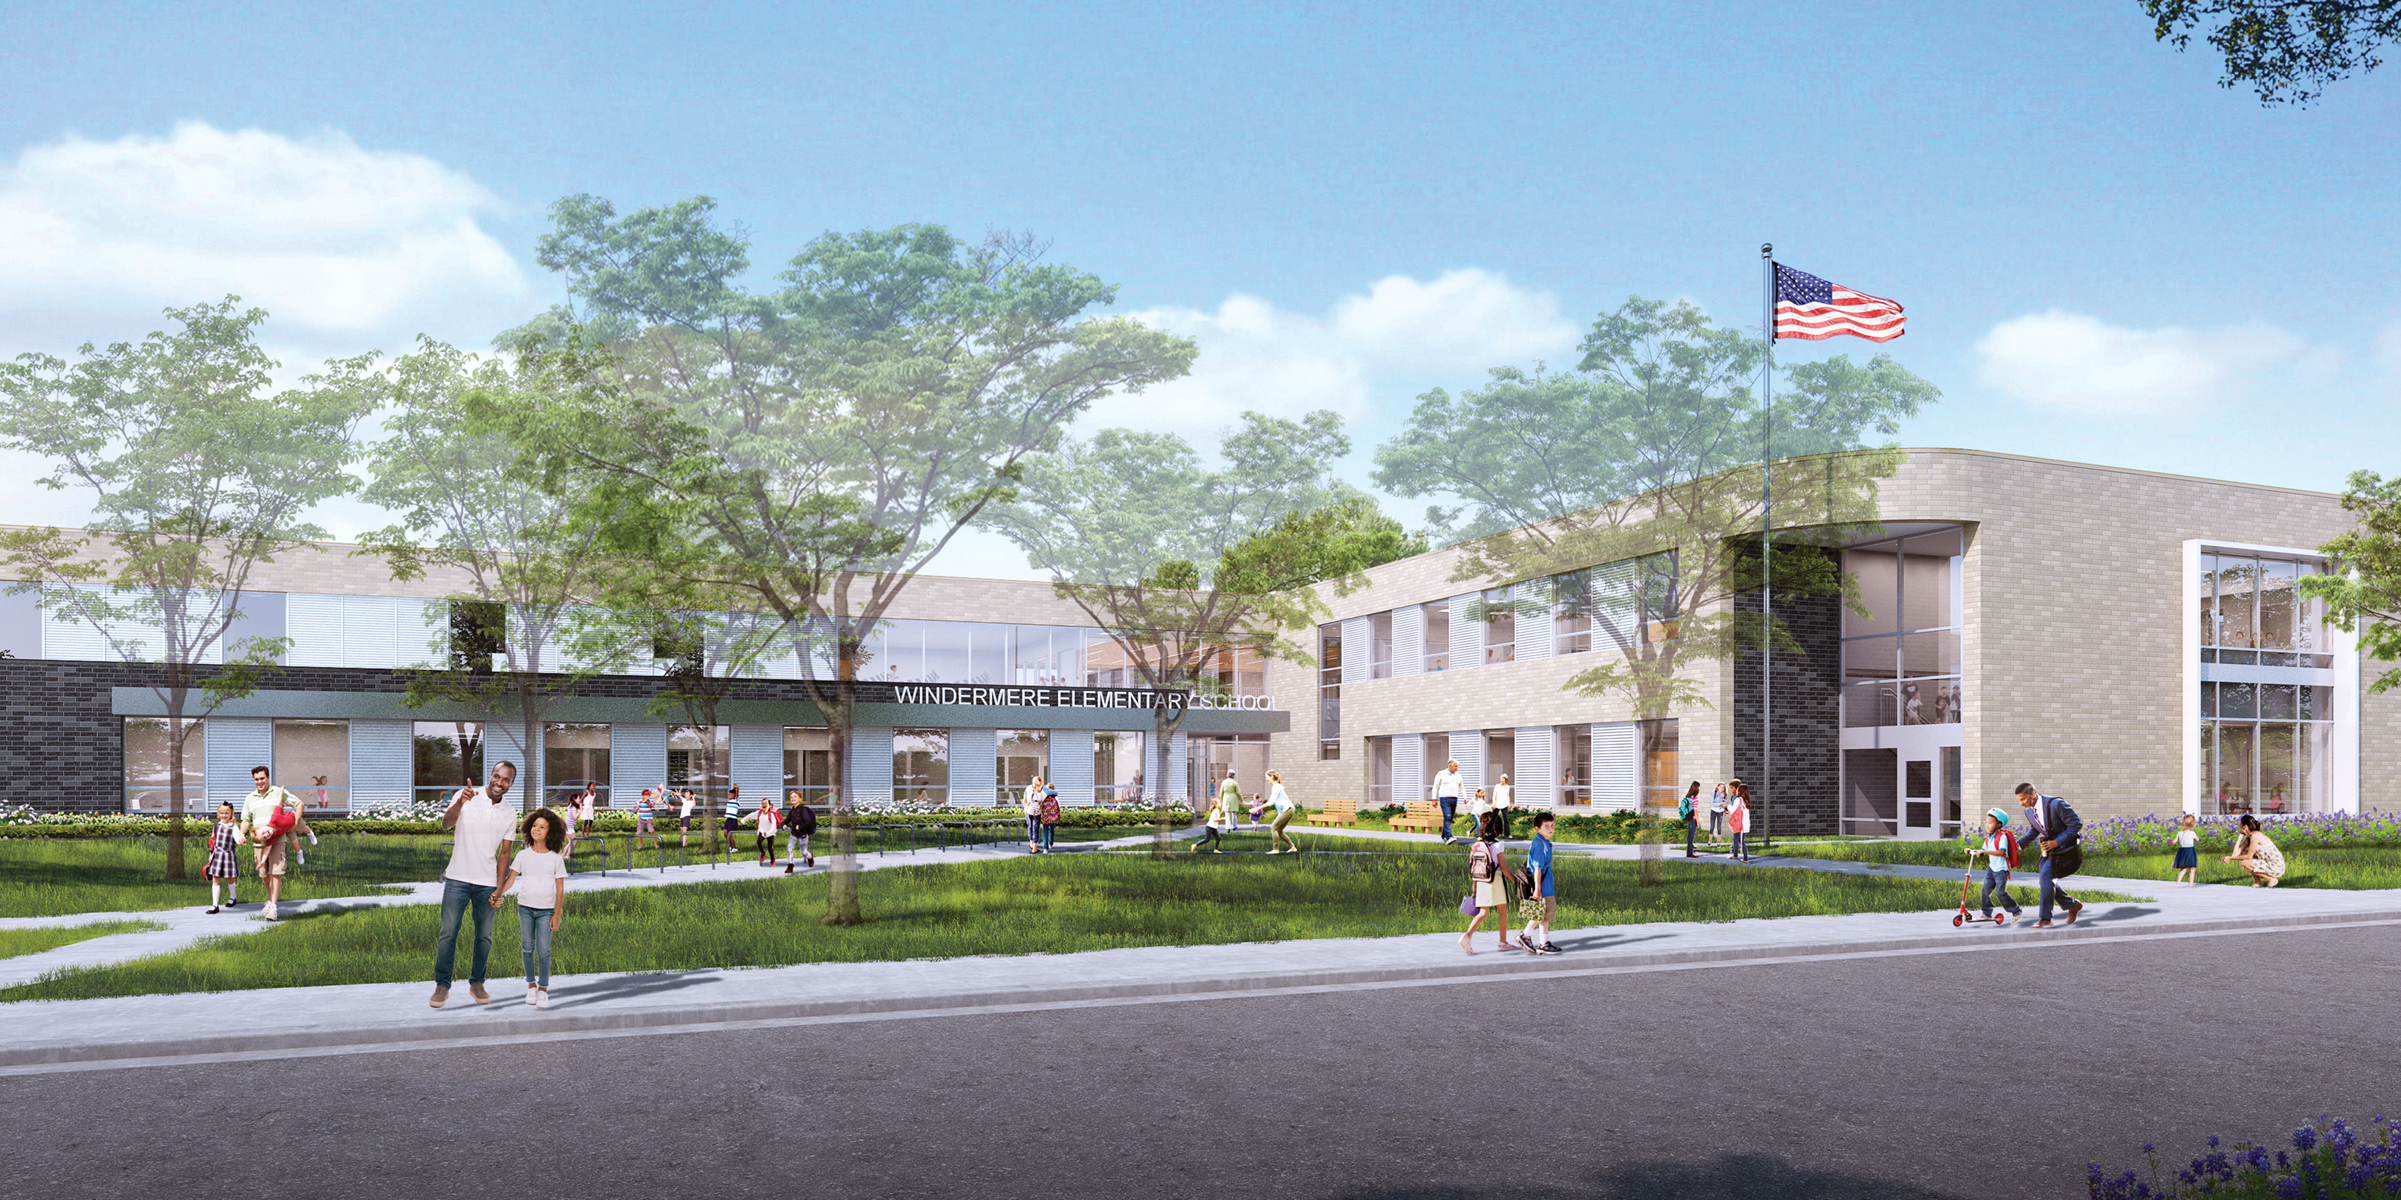 A rendering of the exterior of the new Windermere Elementary School, shown facing Windermere Road